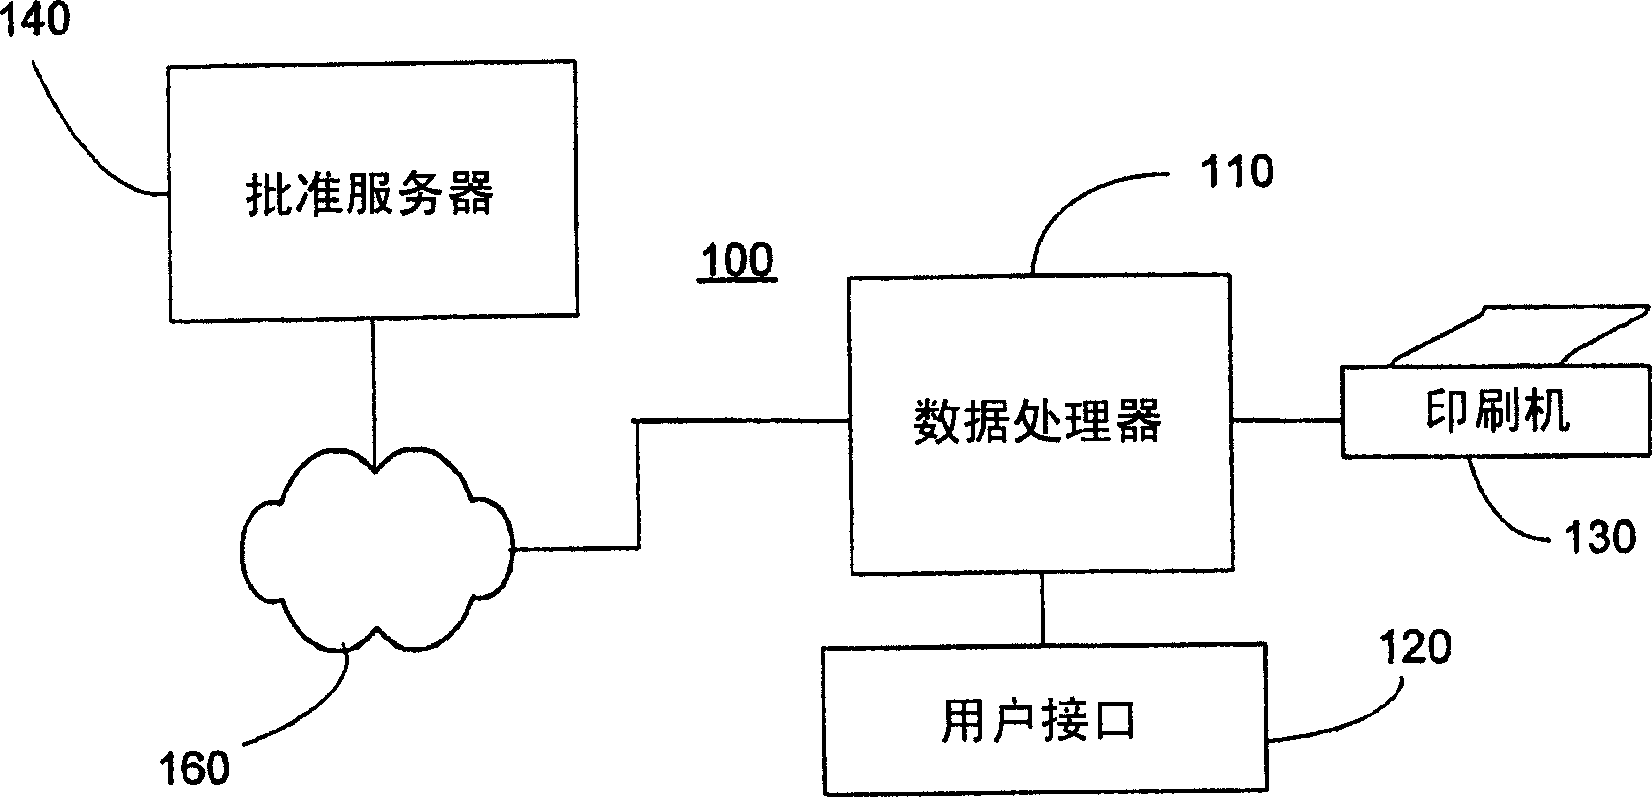 Method and system for controlling encoded image production using image signatures